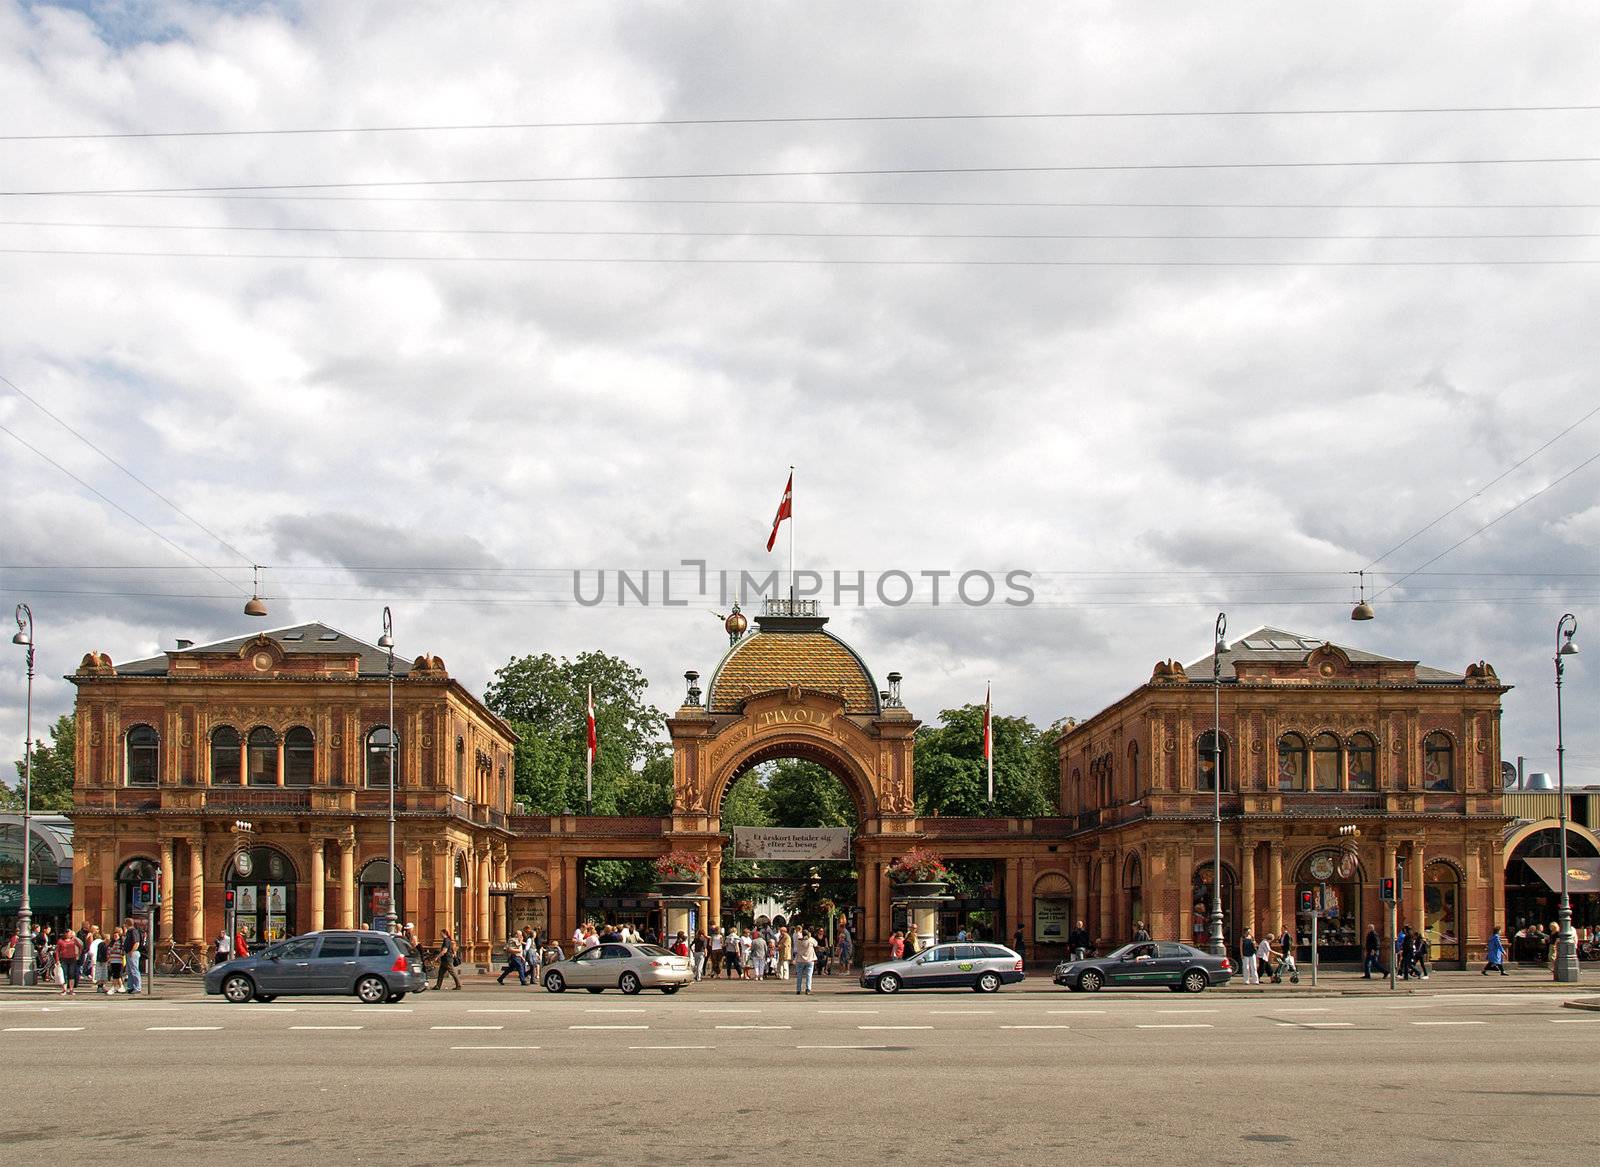 TIVOLI, COPENHAGEN - JULY 19: Tivoli Gardens entrance, July 19, 2009. Built in 1843, it is the most famous amusement park in Denmark. It is a place of enjoyment and recreation for tourists and Danes.